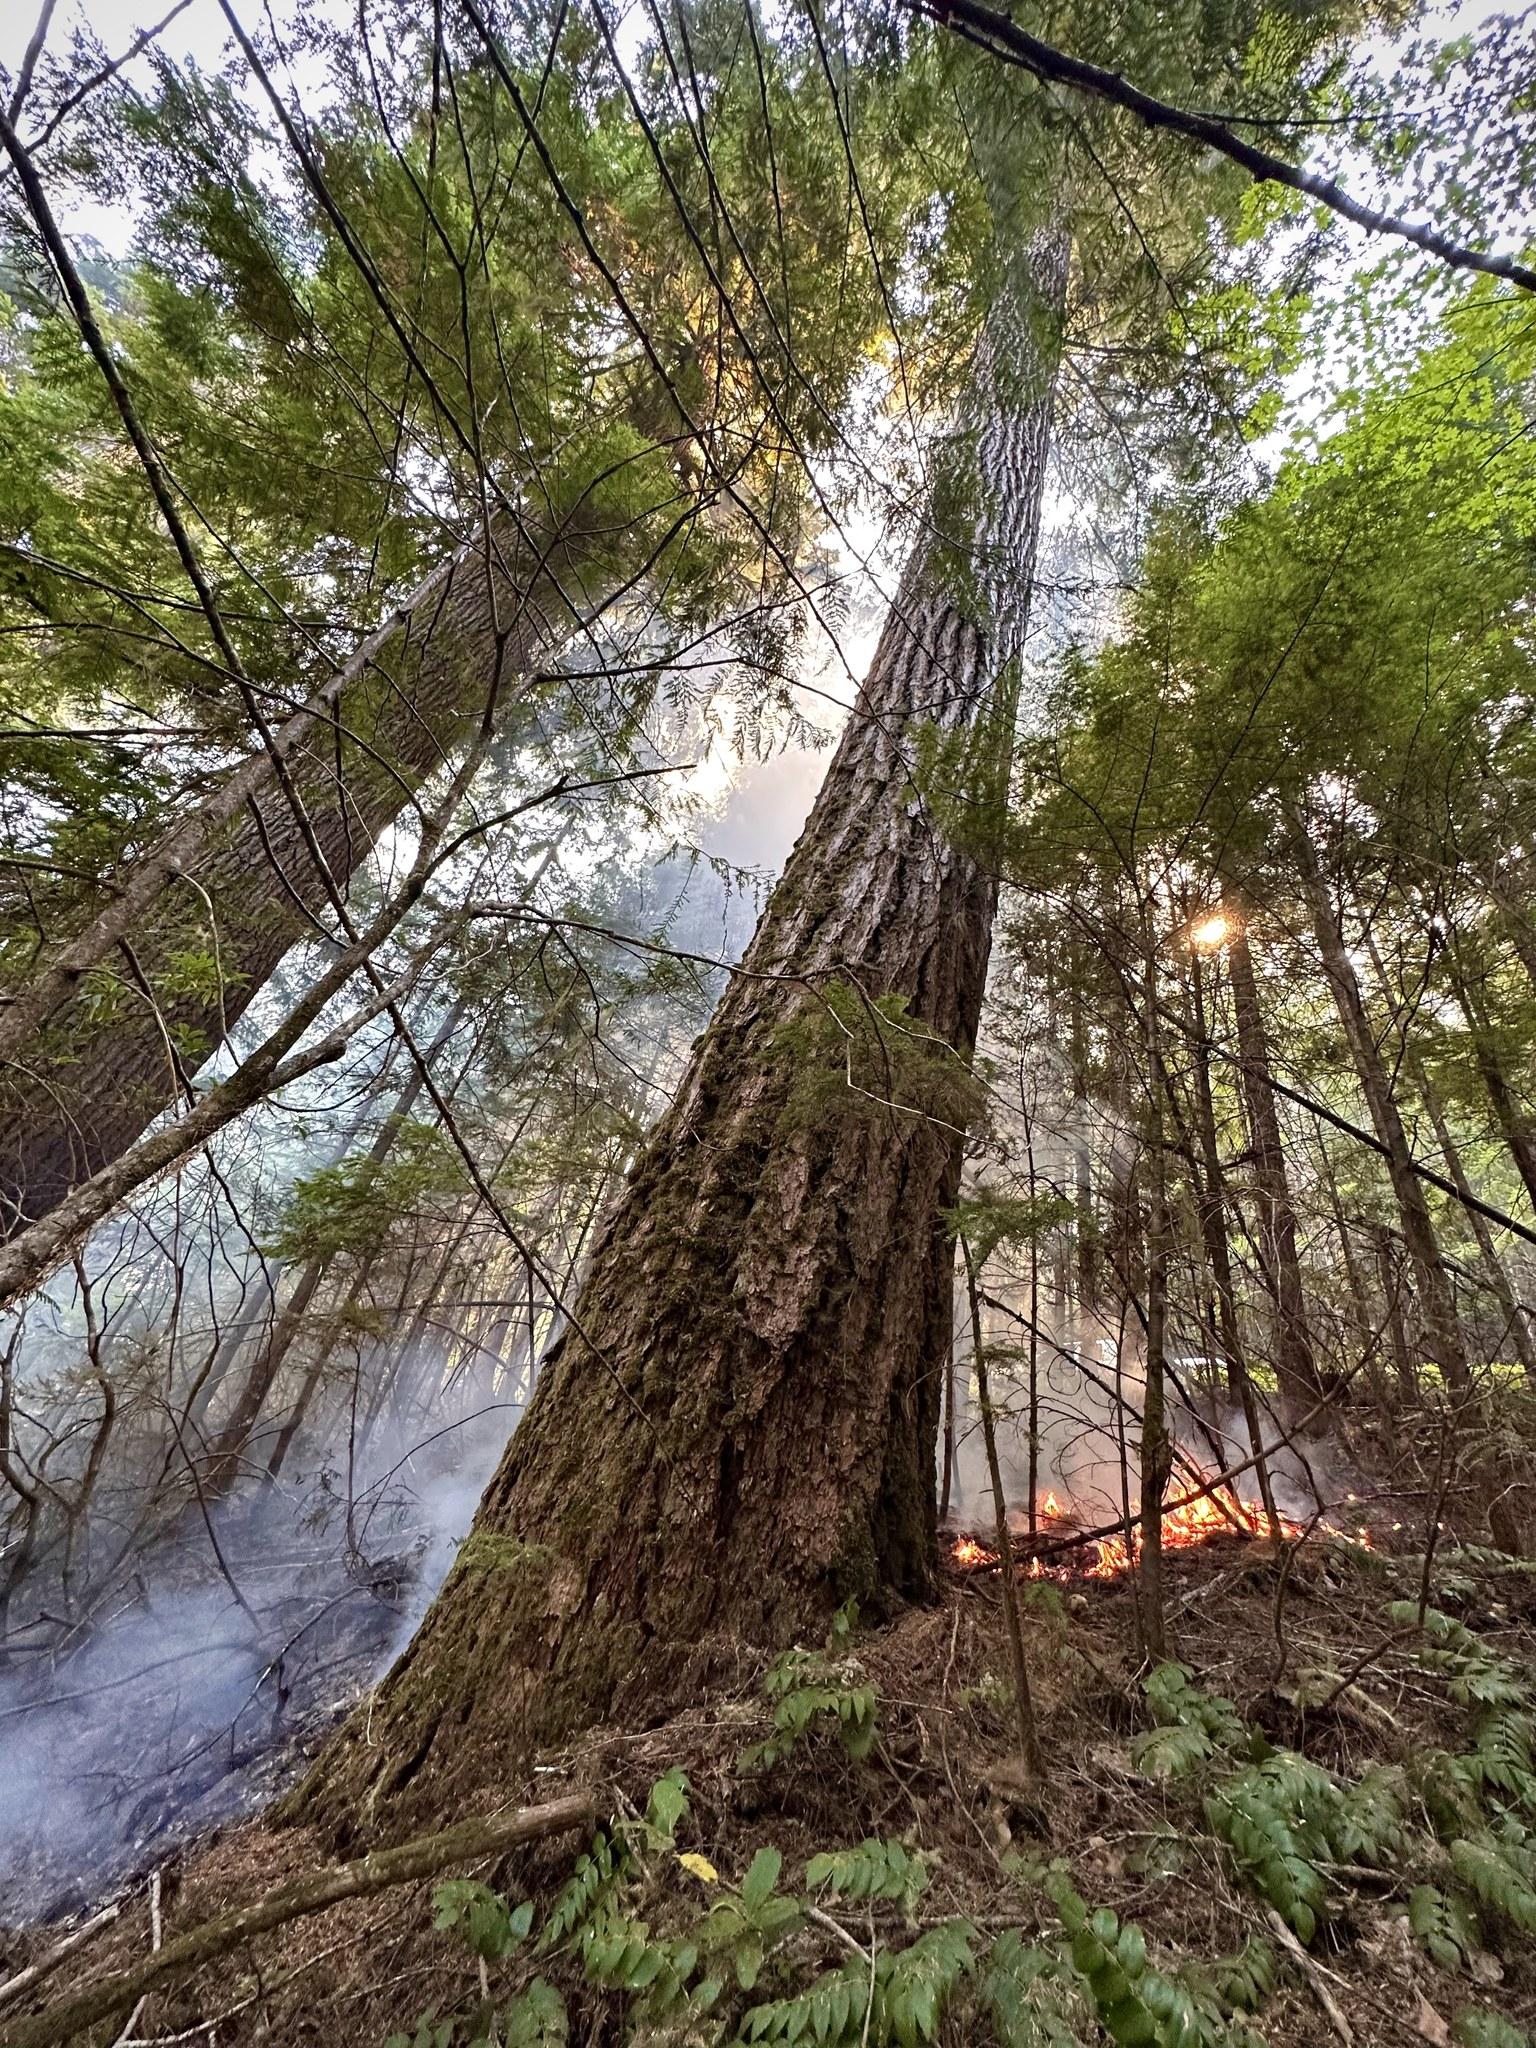 This is an image of healthy treees and smoke from the approaching fire